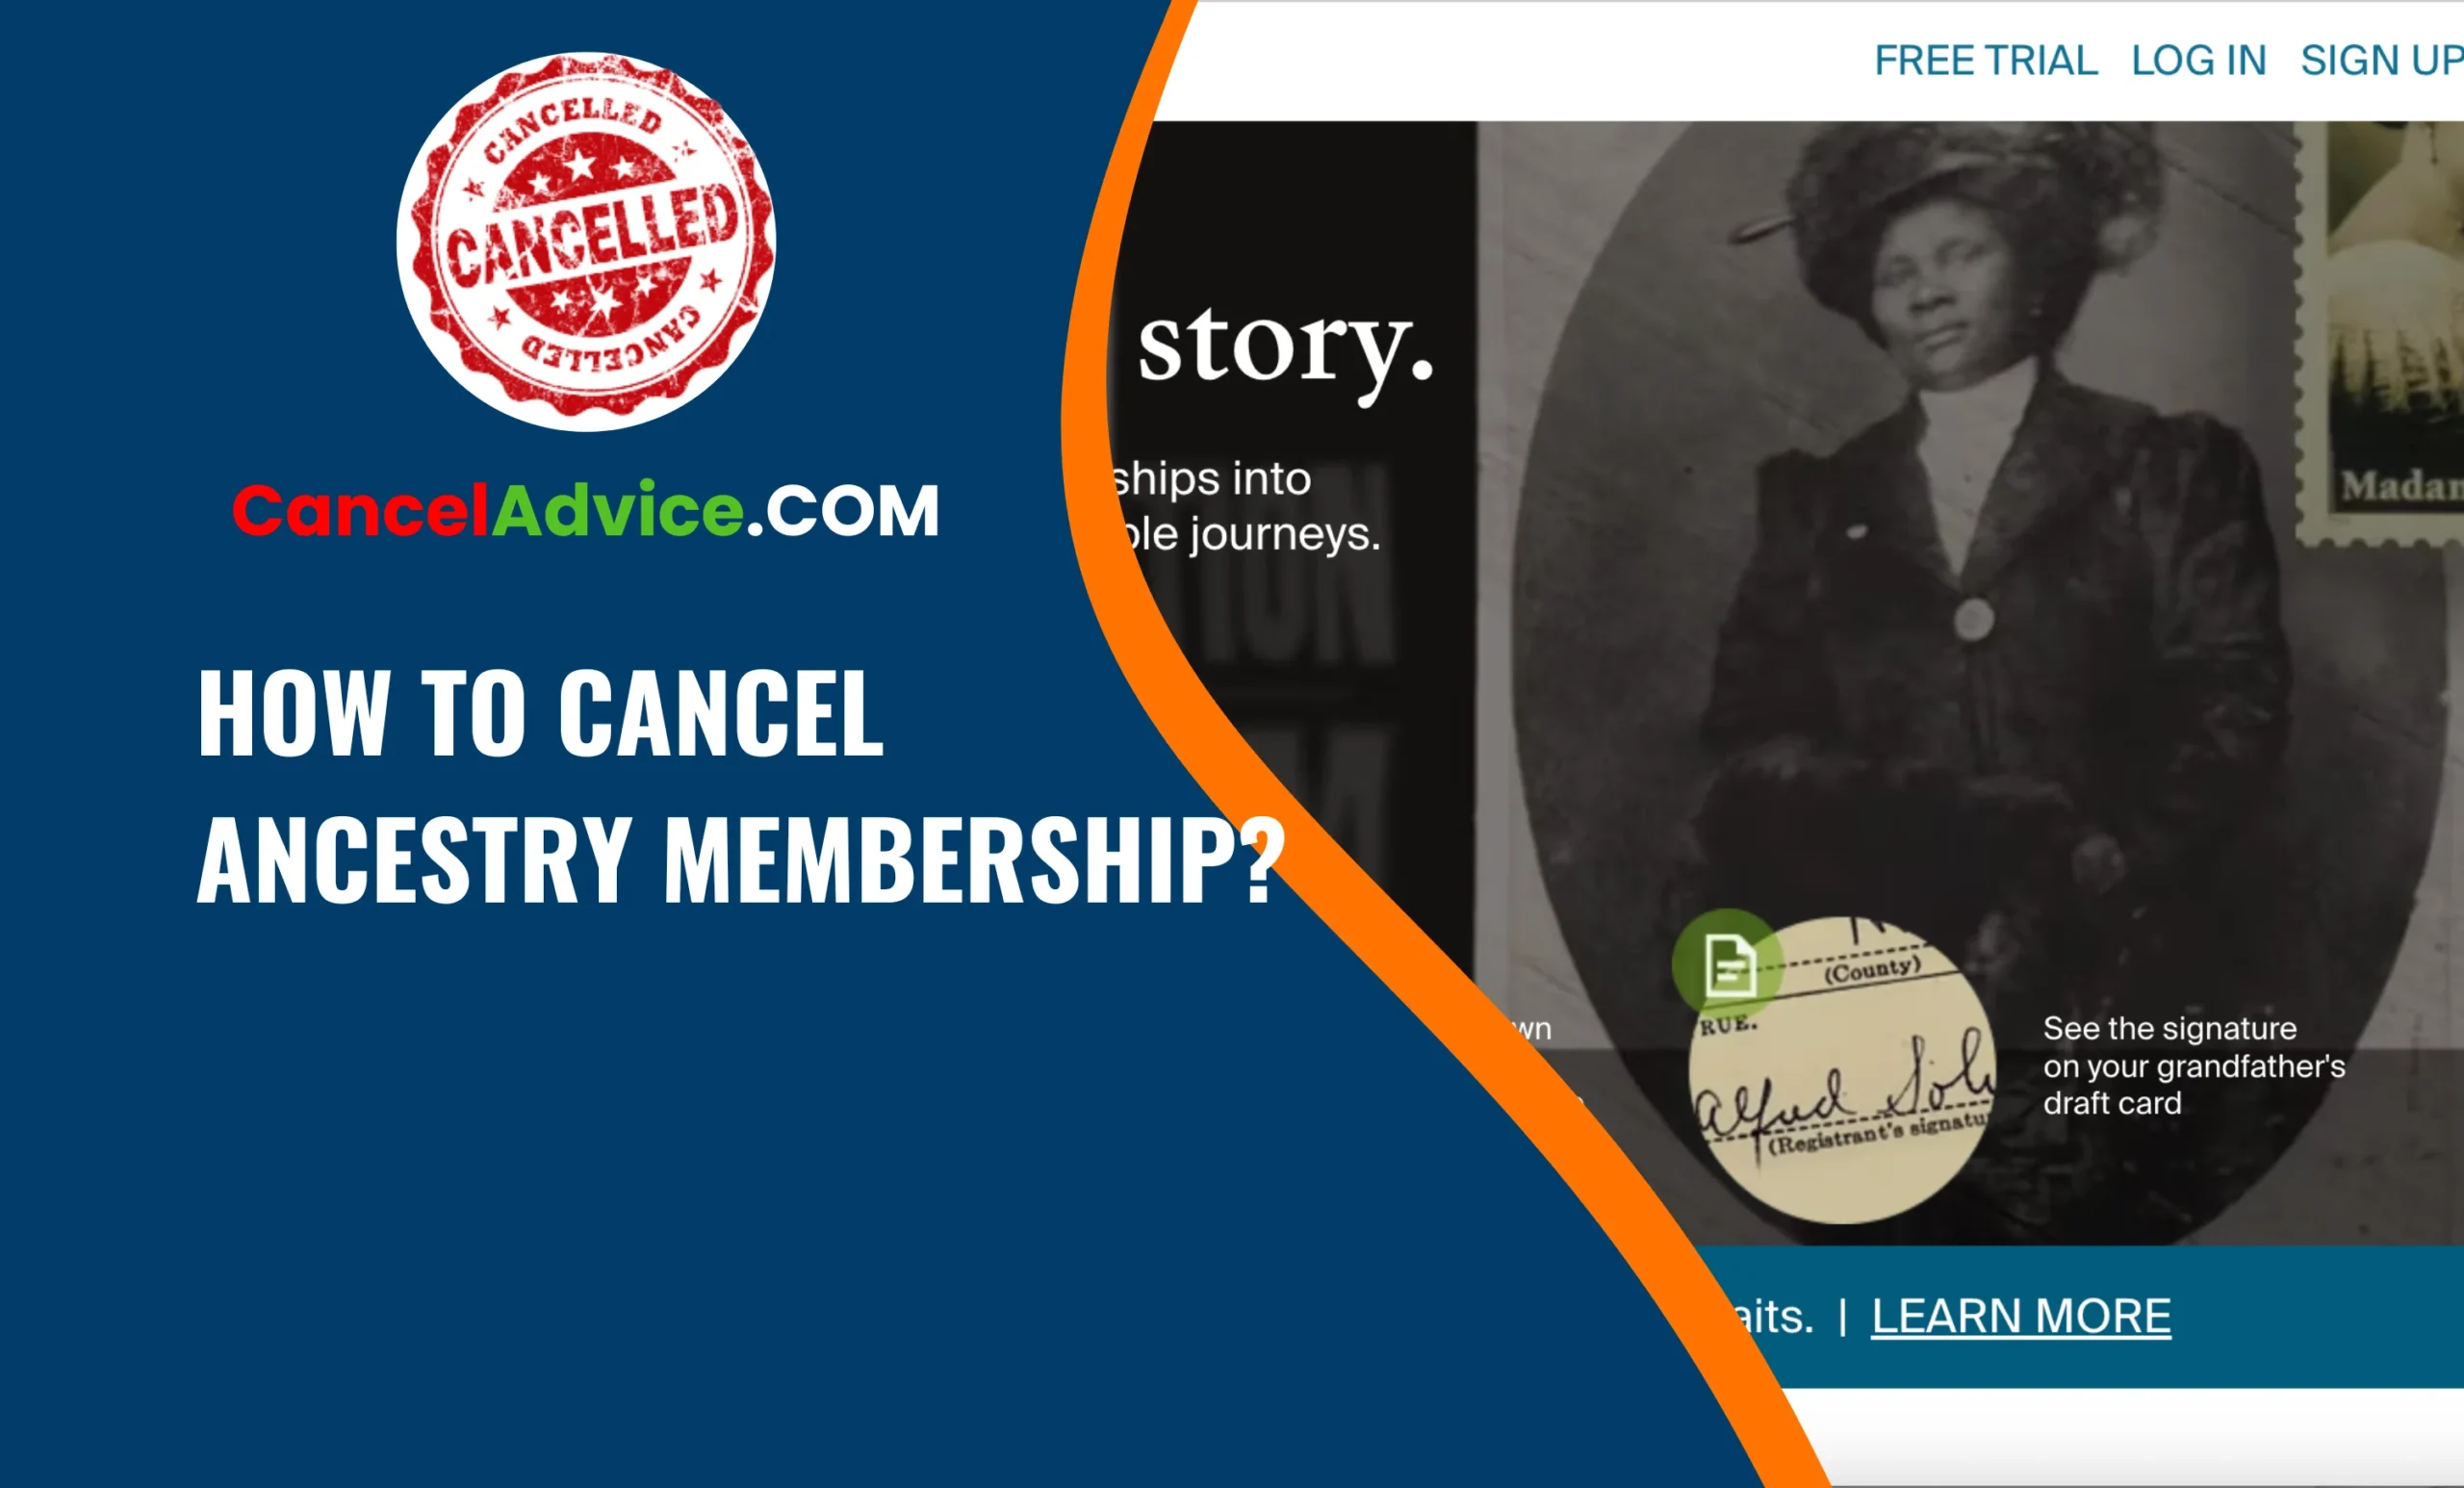 How to Cancel Ancestry Membership